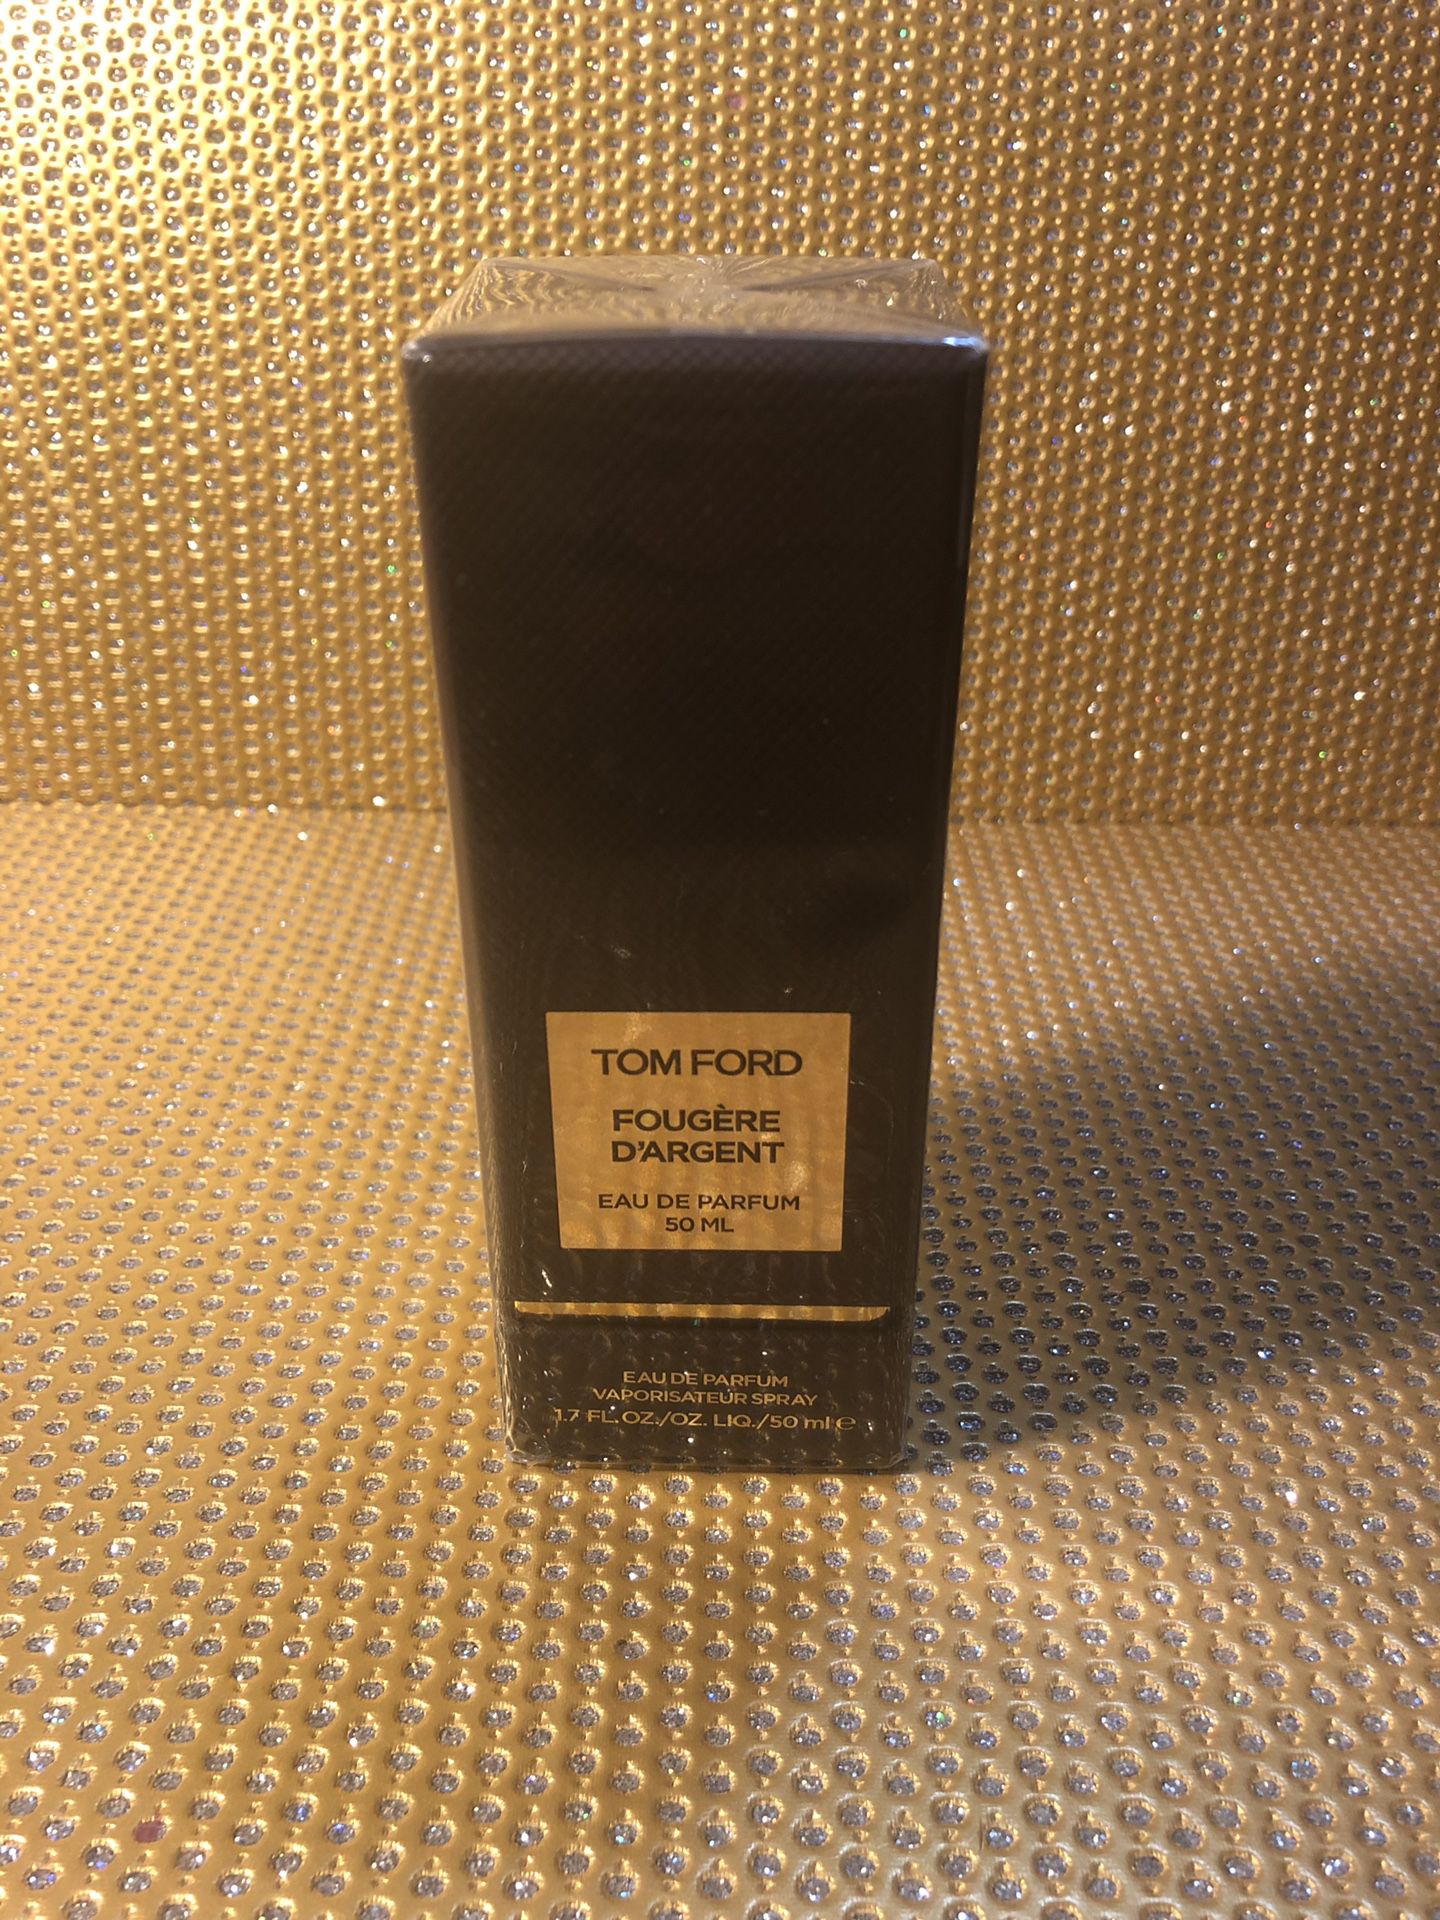 Colognes and Perfumes, Tom Ford, Chanel and more! Scroll thru my pics to see all of them.